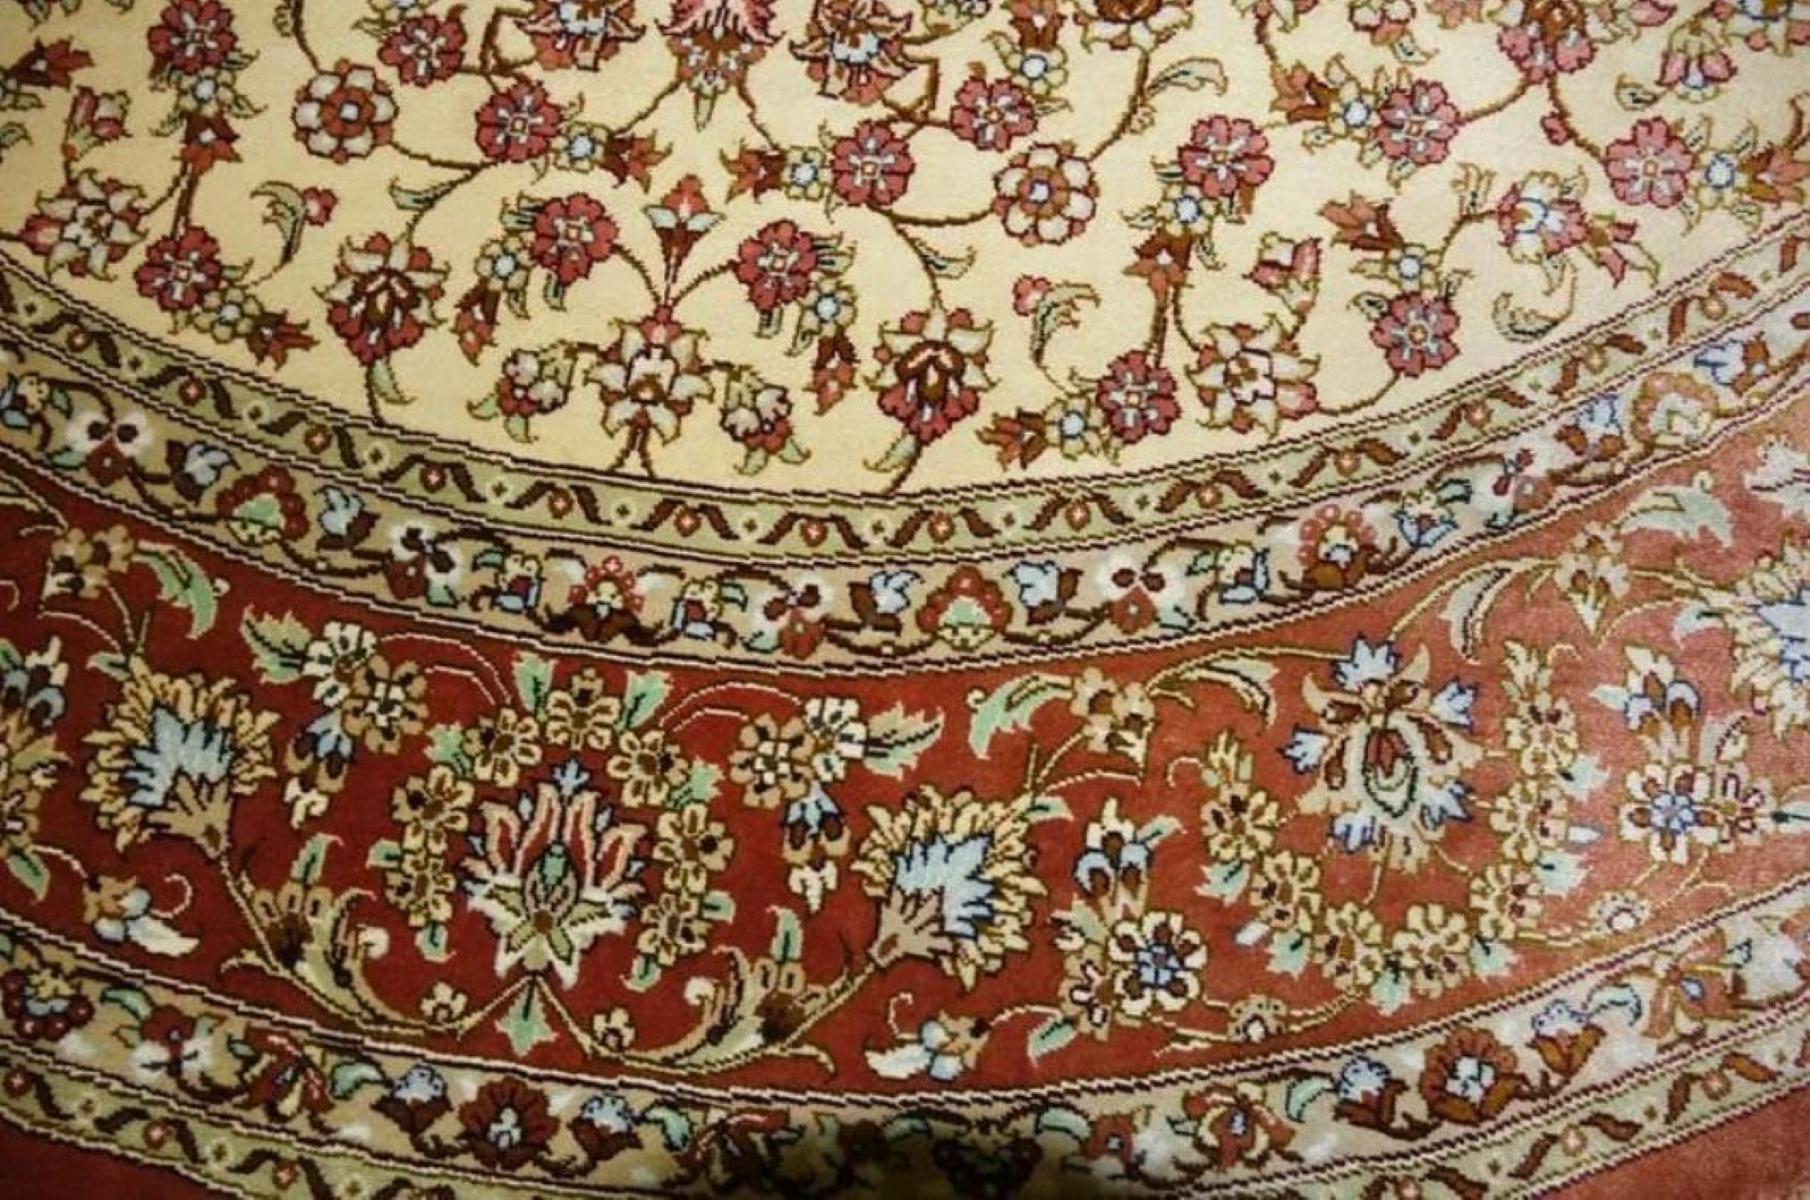 Very fine Persian Rug Qum 700 Knots per inch, Size 5 x 5  Silk and Silk foundation. Around 2,500,000 knots tied by hand one by one. It takes 2 years to complete this piece of art.